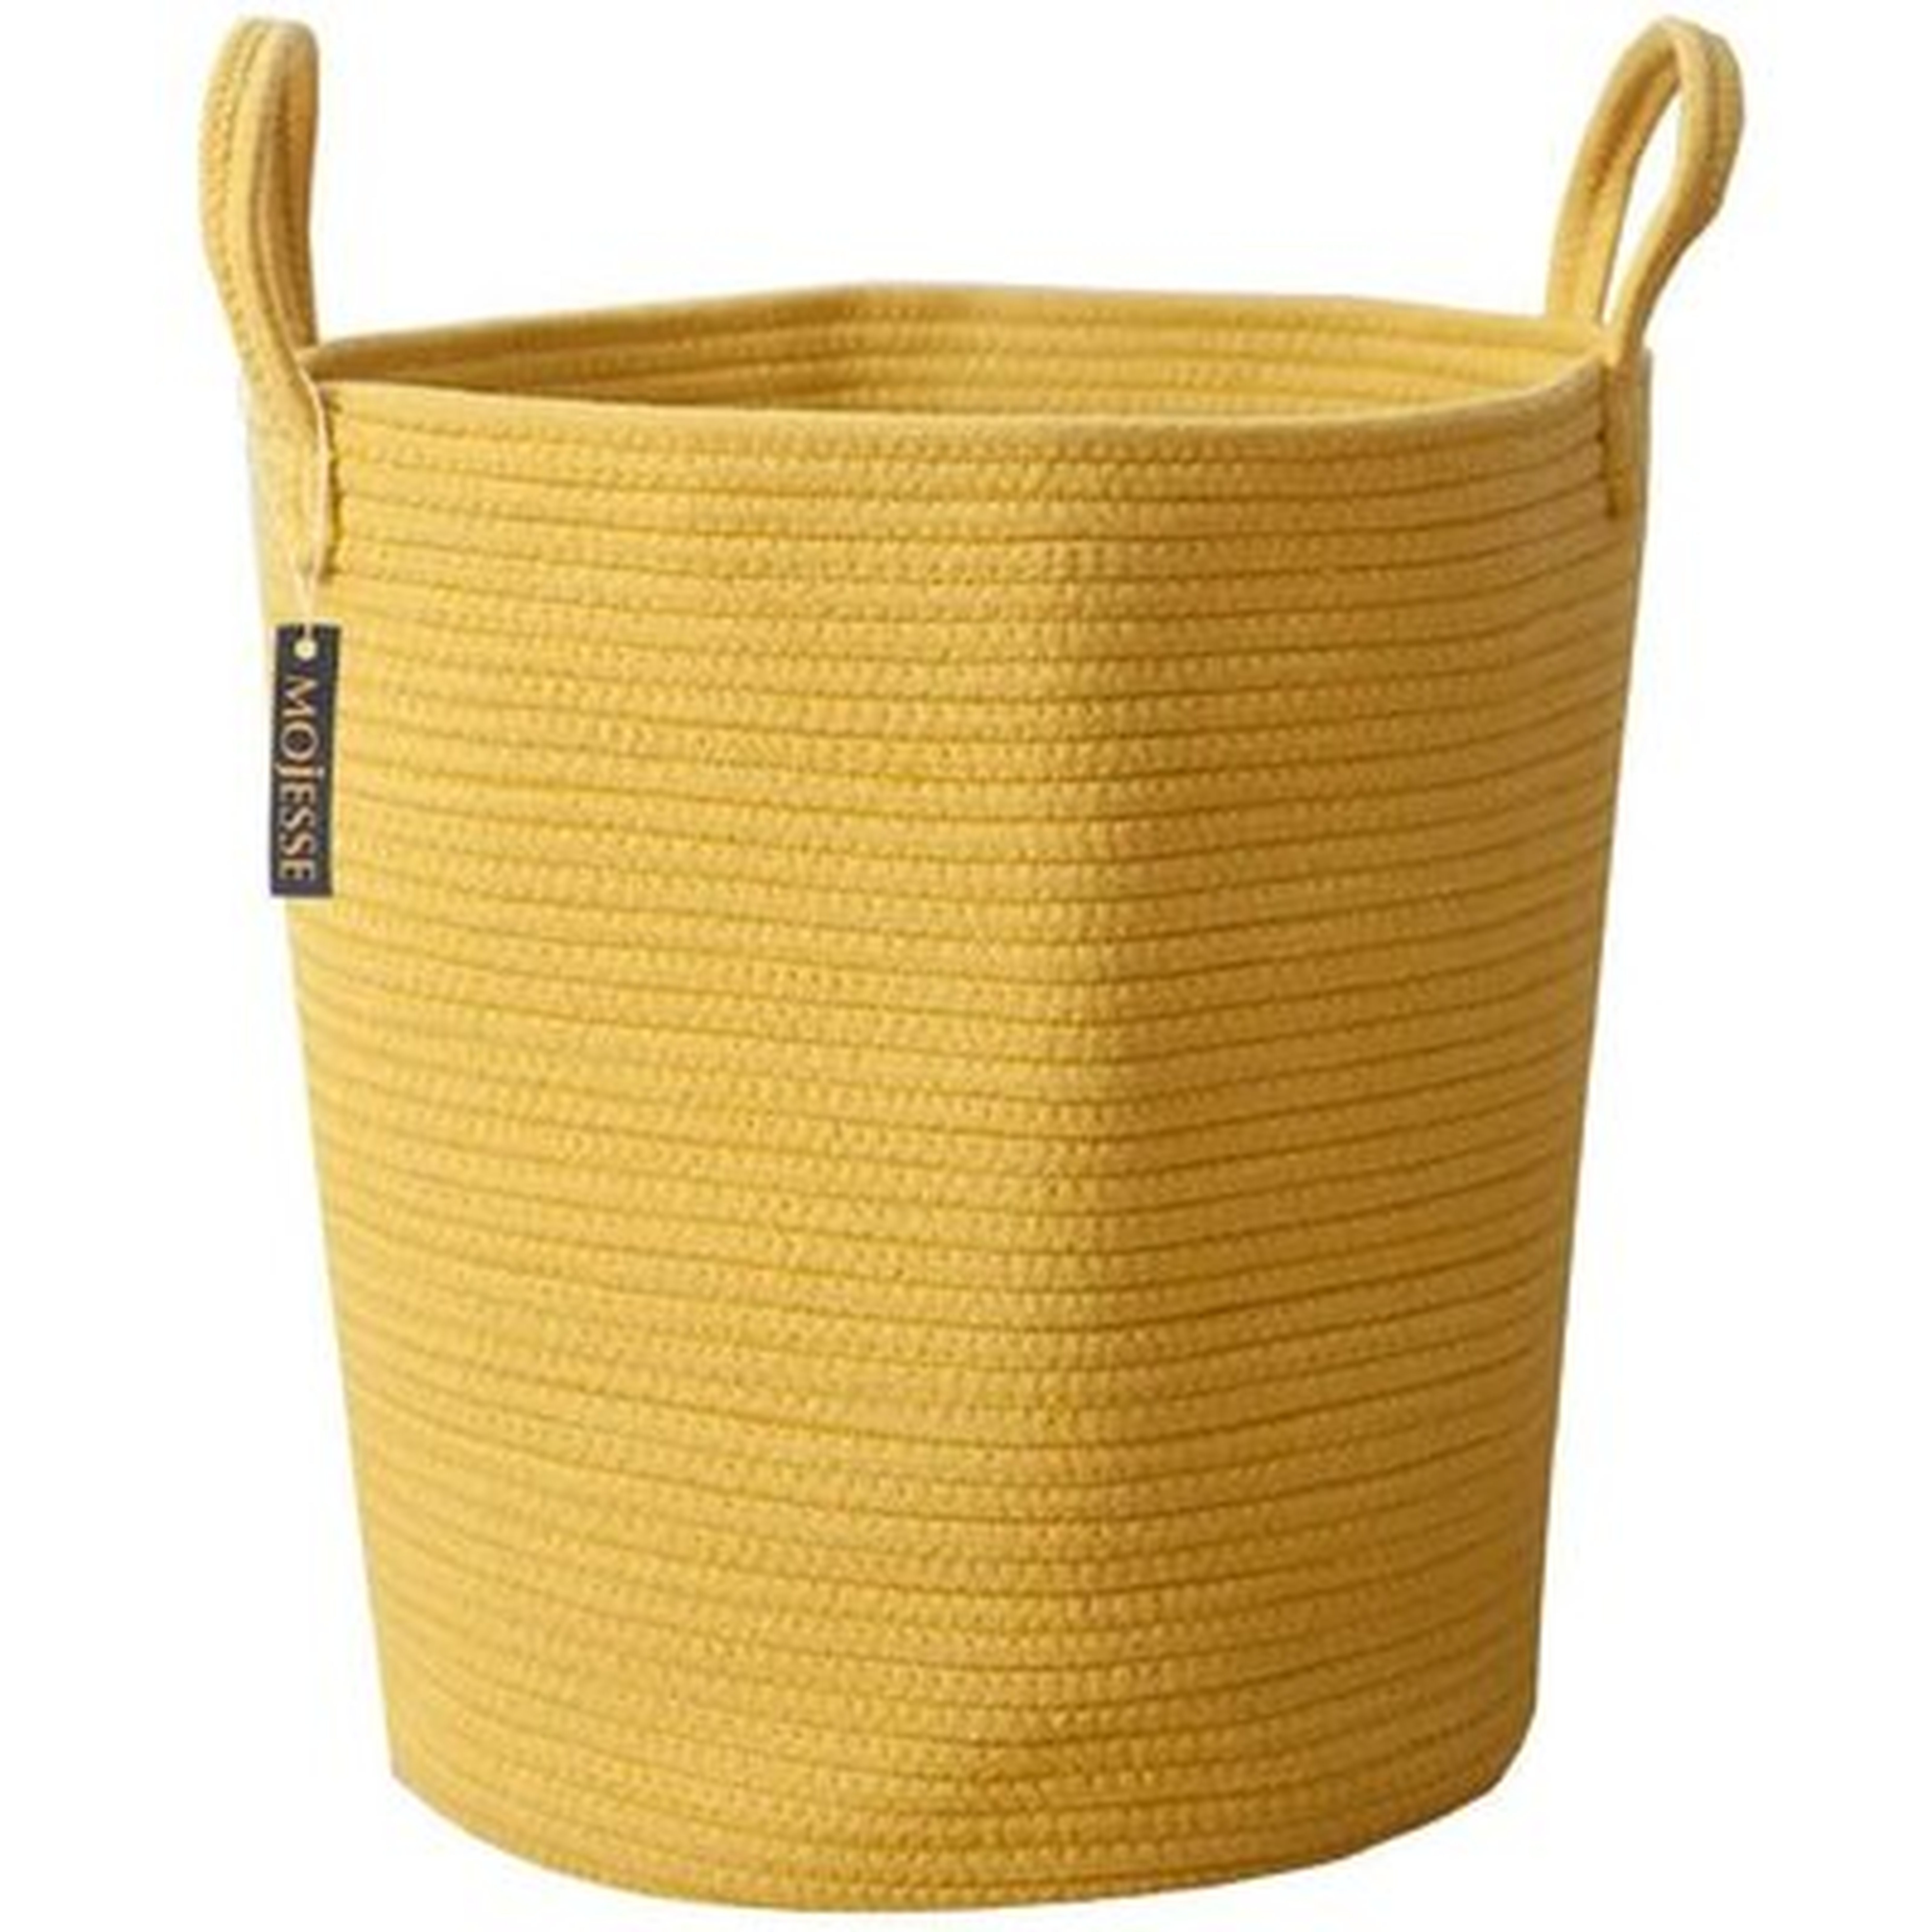 Large Baskets For Blankets,Soft Cotton Rope Woven Storage Baskets With Strong Handles,Perfect For Nursery Laundry Basket,Kids Toy Hamper, Throw Blanket Basket For Living Room - Wayfair